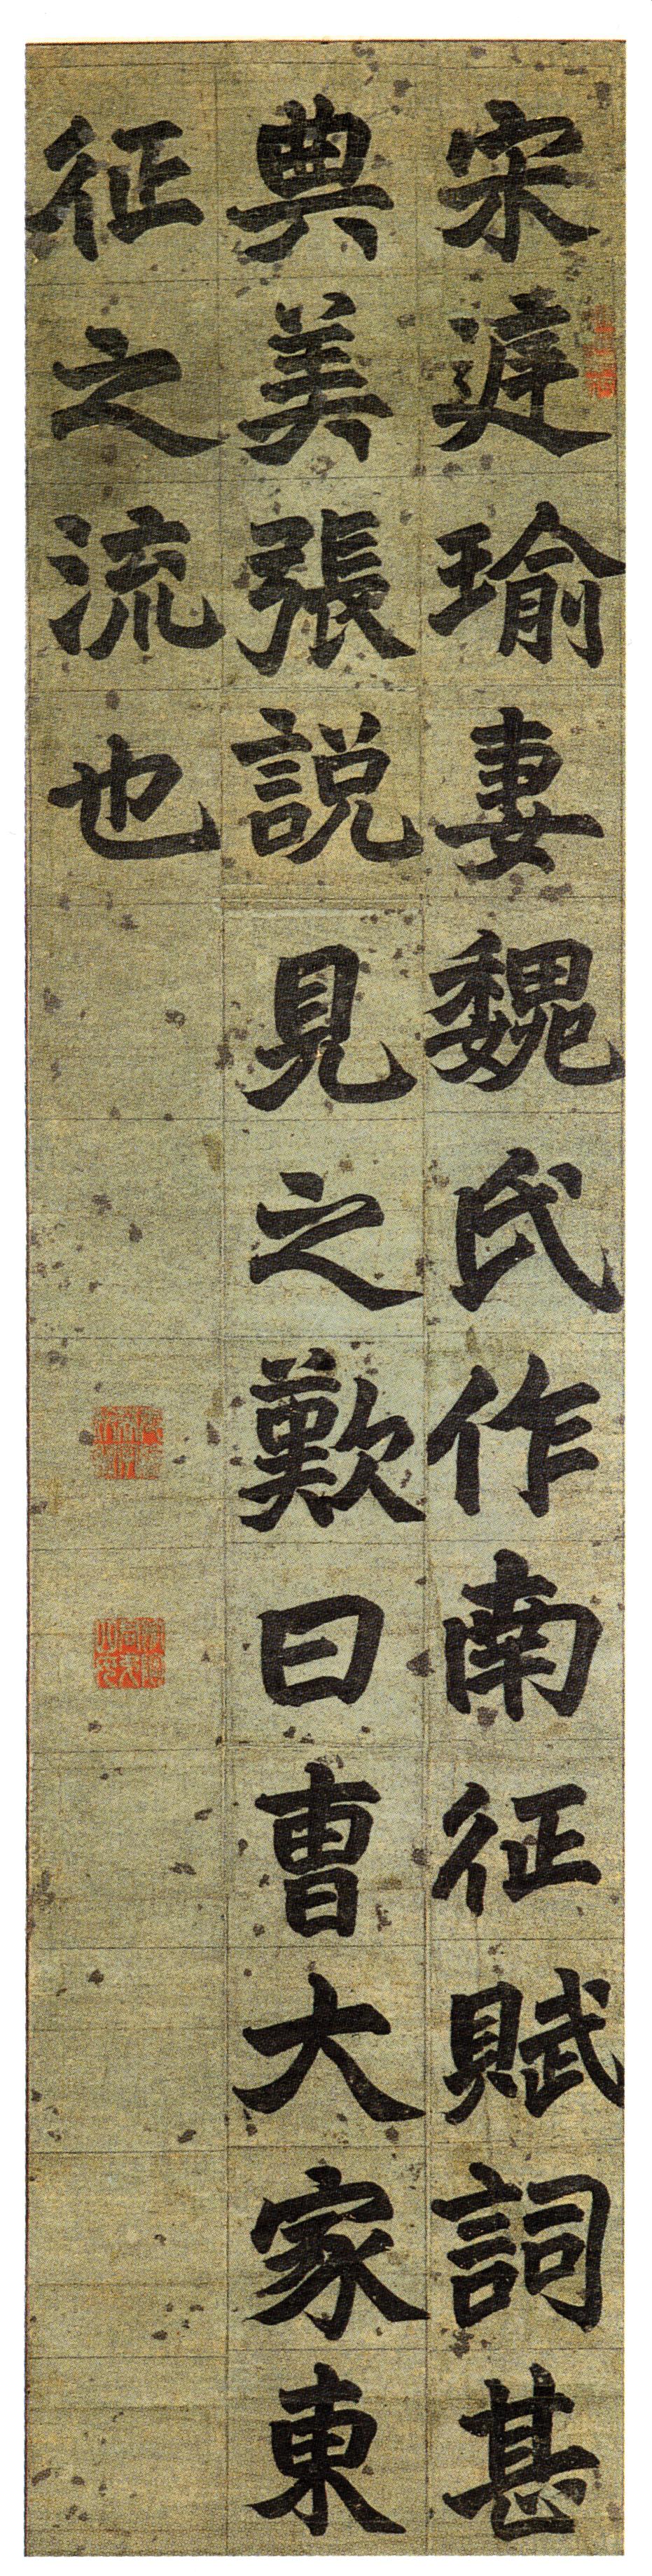 close up of Chinese characters